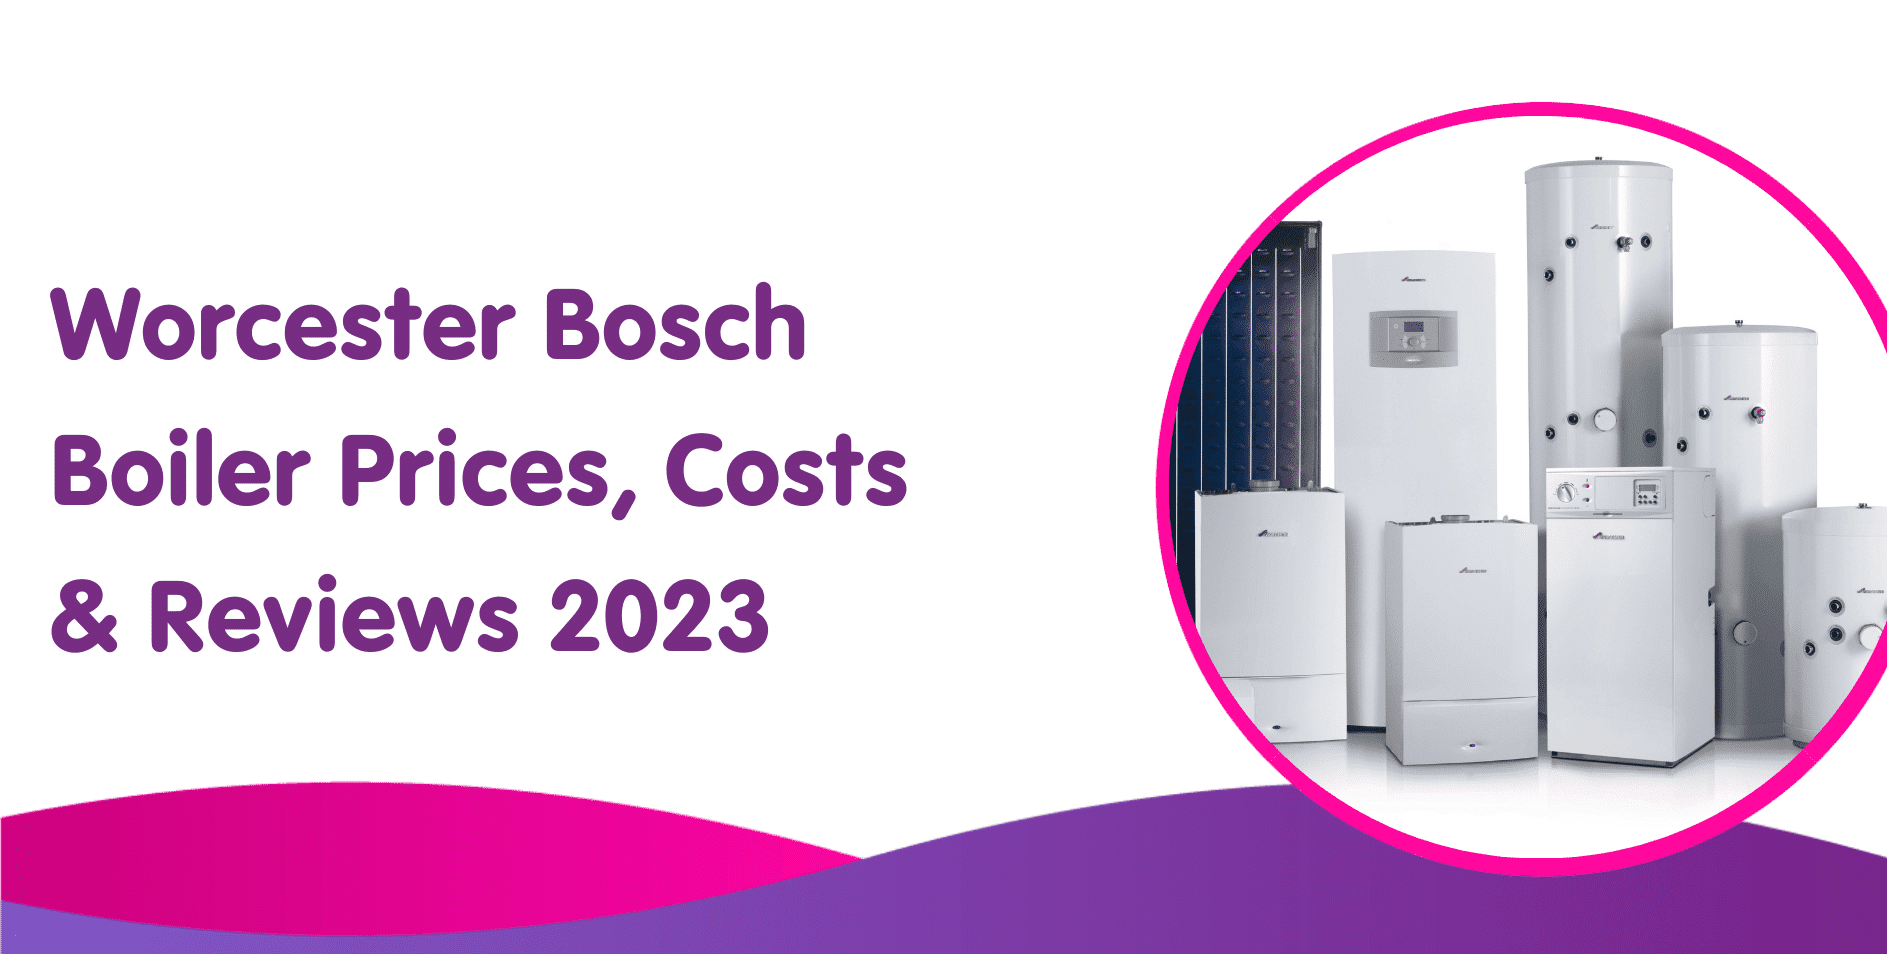 Worcester Bosch Boiler Prices, Costs & Reviews 2023